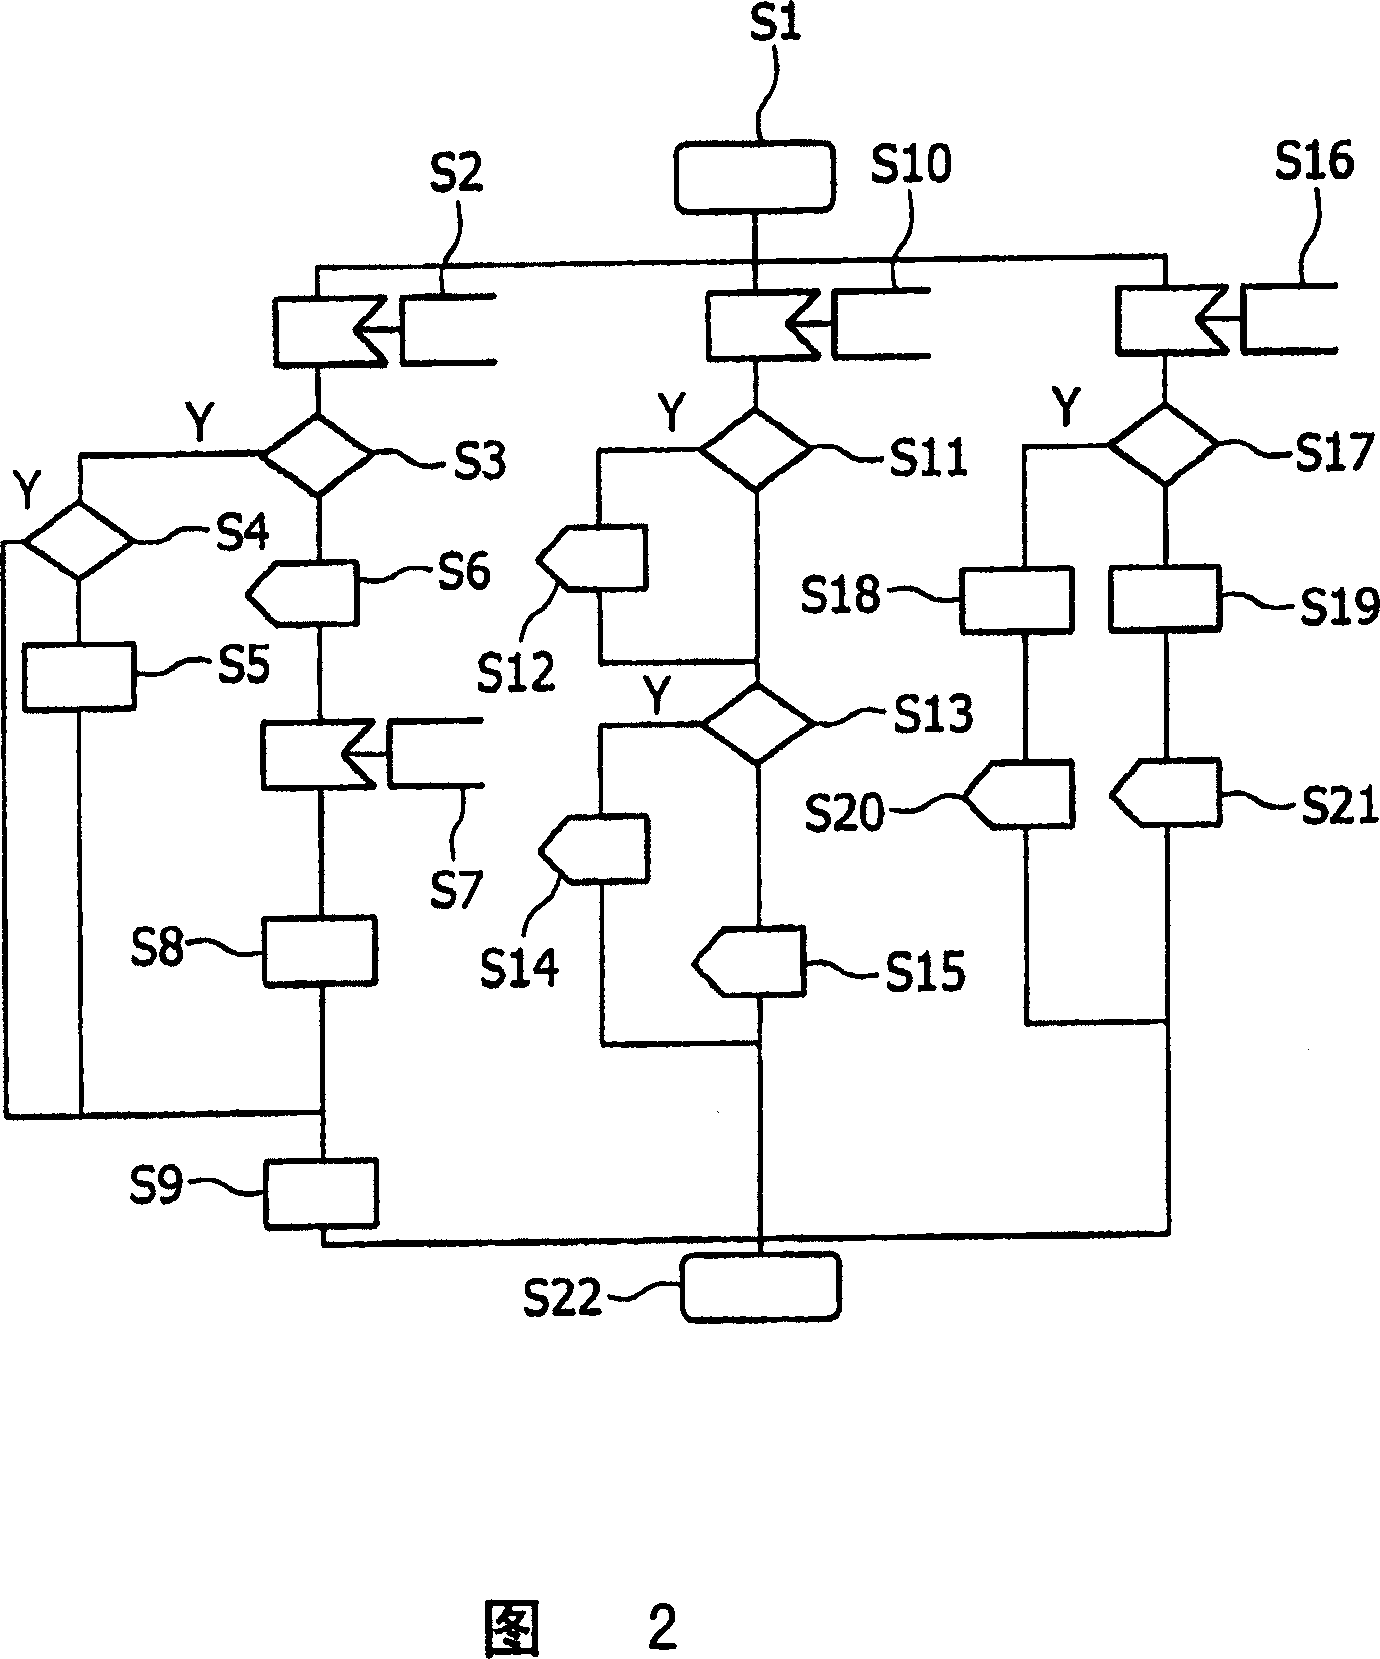 Data transmission in a communication network